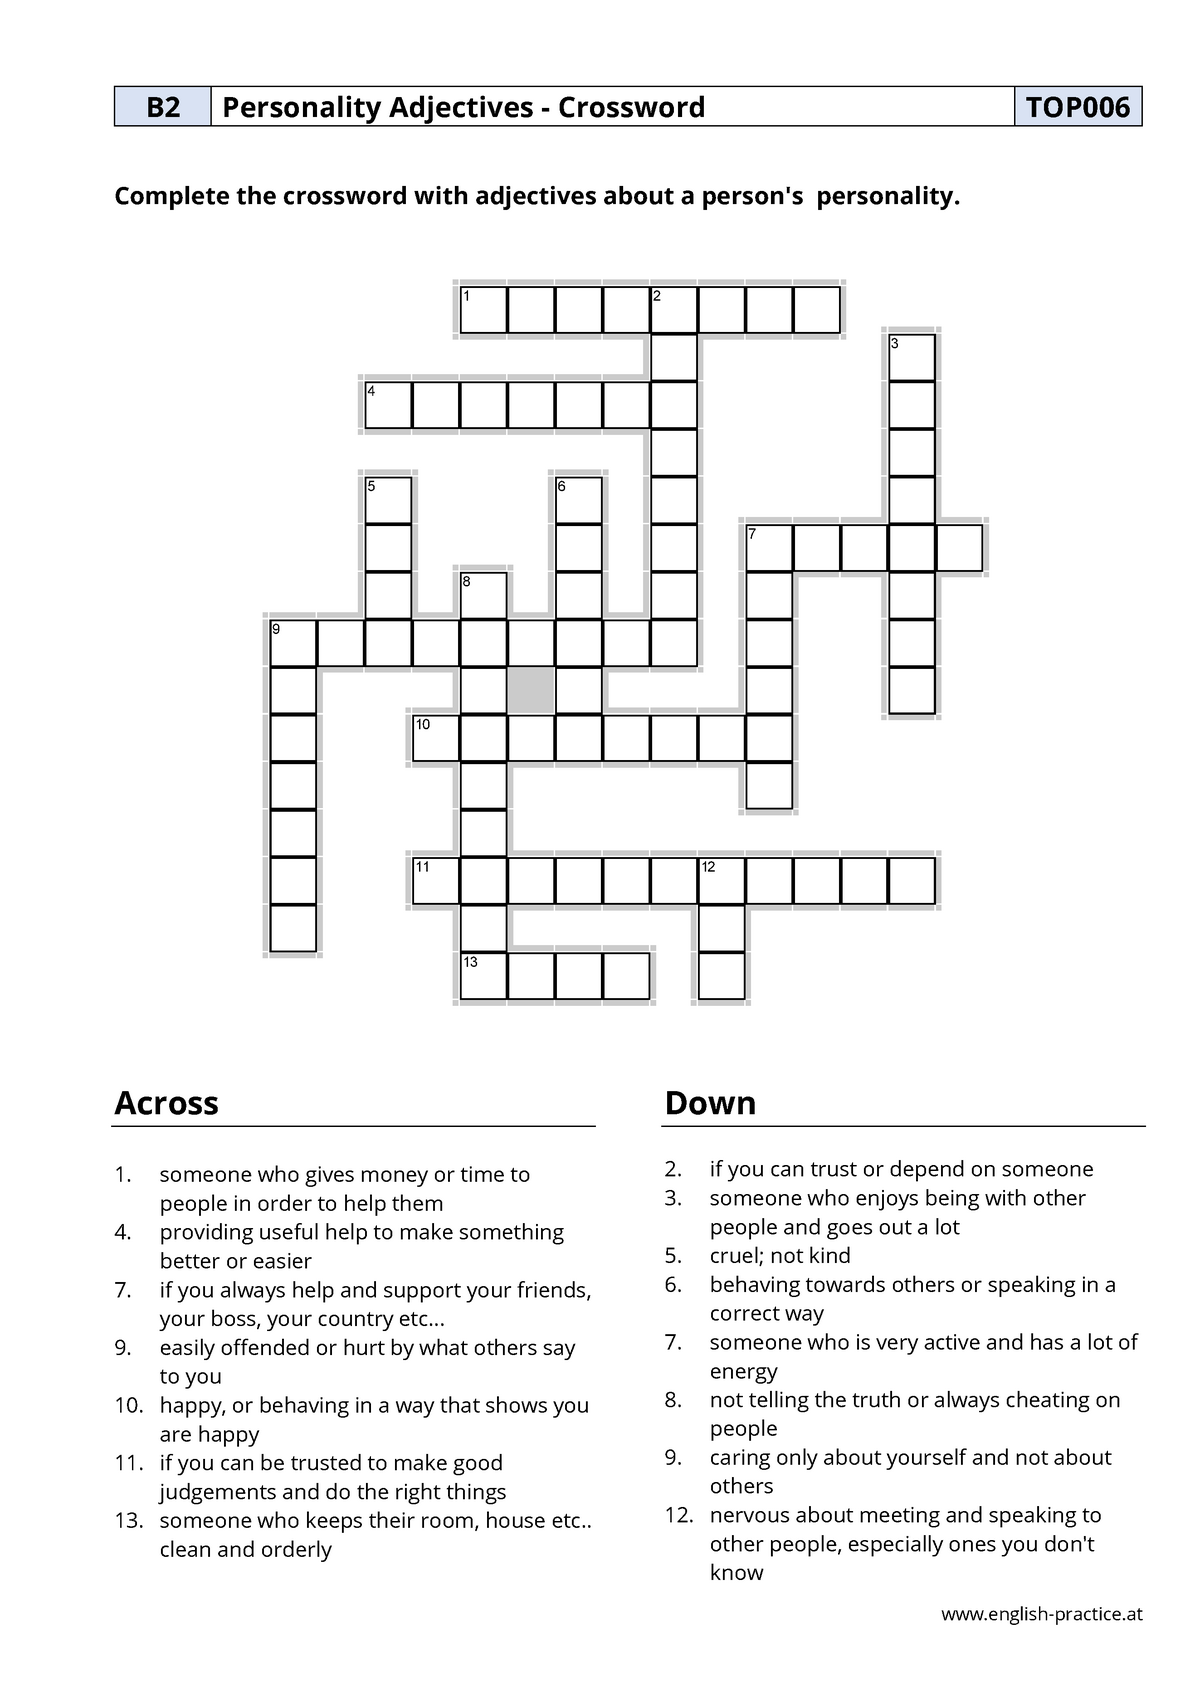 top006-personality-adjectives-crossword-english-practice-b2